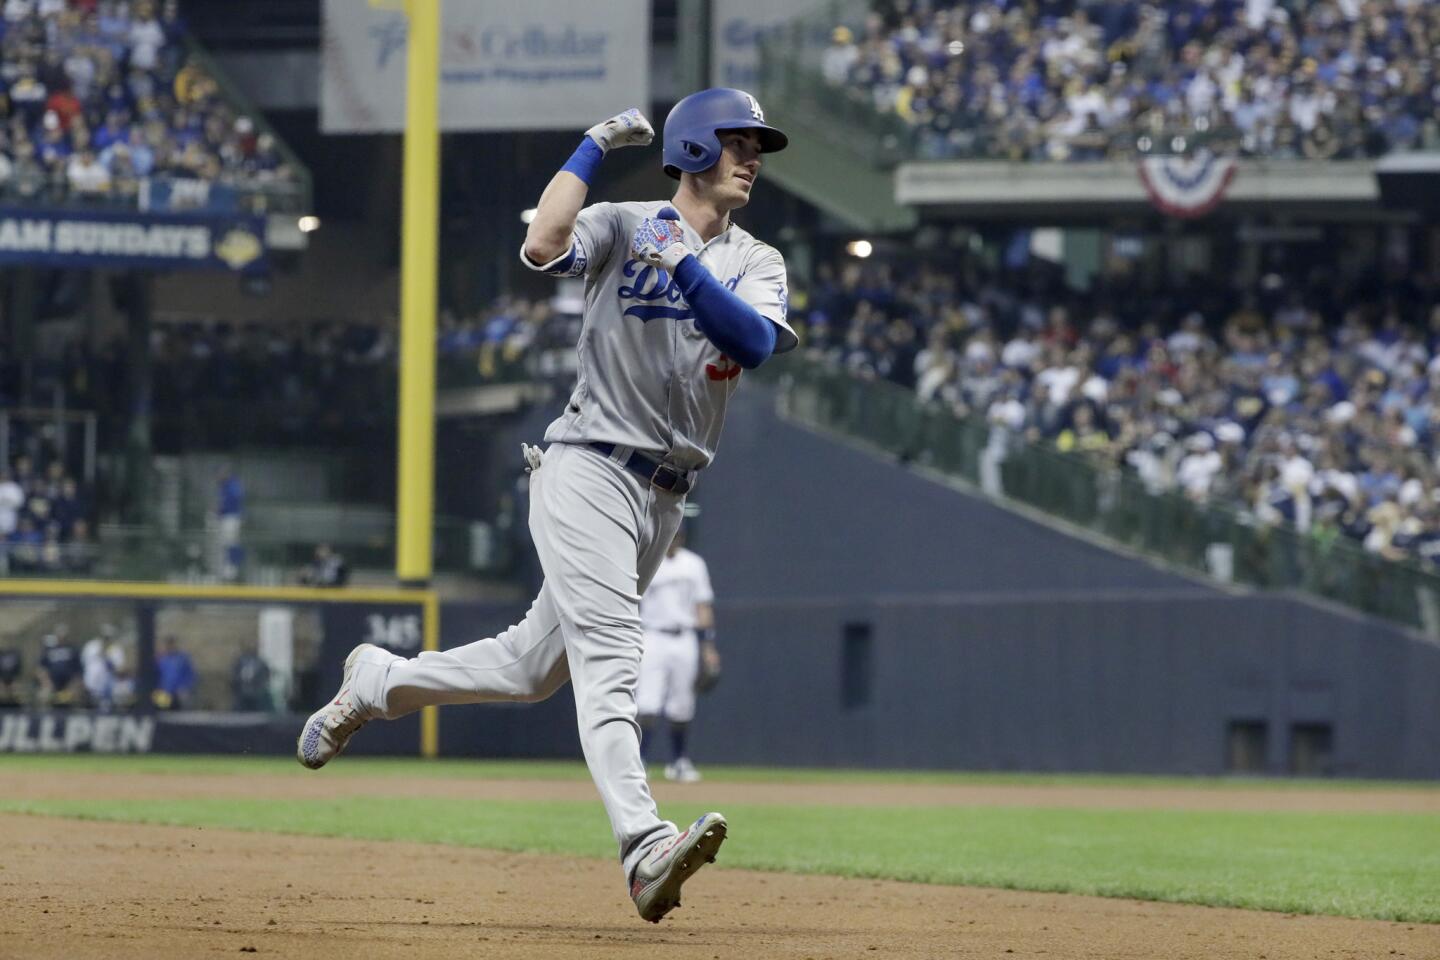 Cody Bellinger flexes his muscle as he rounds the bases on a second inning, two run homer.